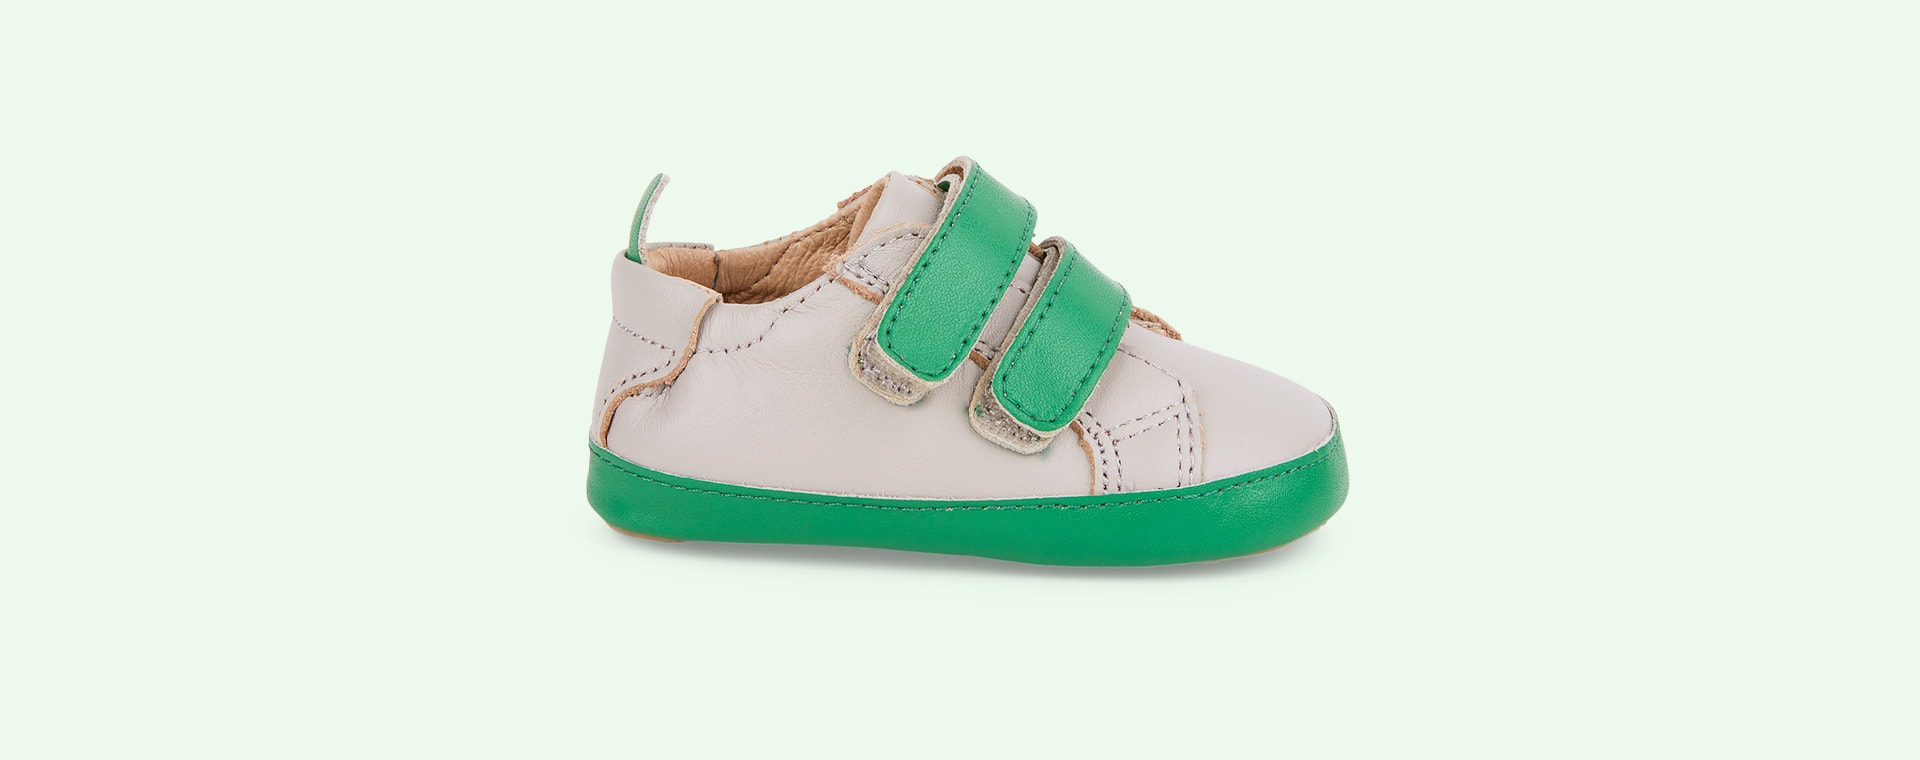 Gris / Neon Green old soles Eazy Market Soft sole Trainer